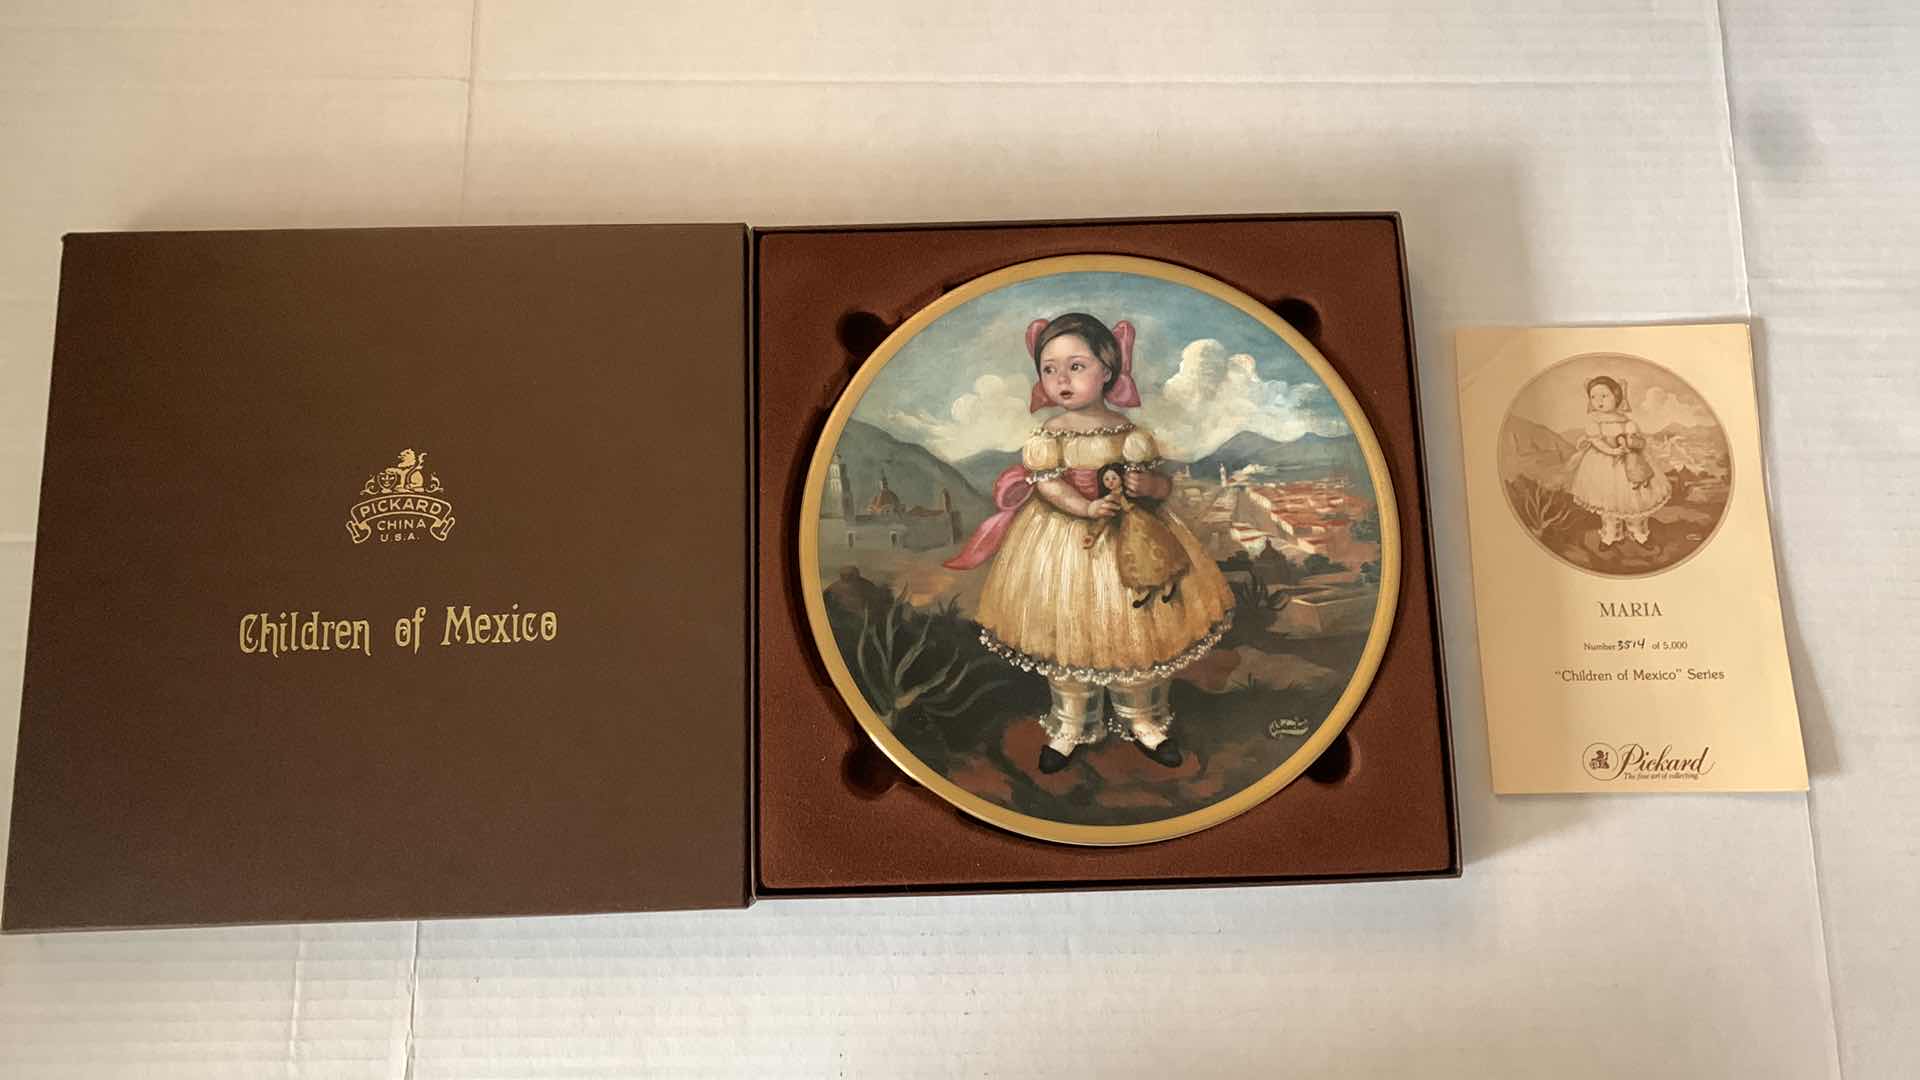 Photo 1 of PICKARD CHINA CHILDREN OF MEXICO “MARIA” SERIES PLATE